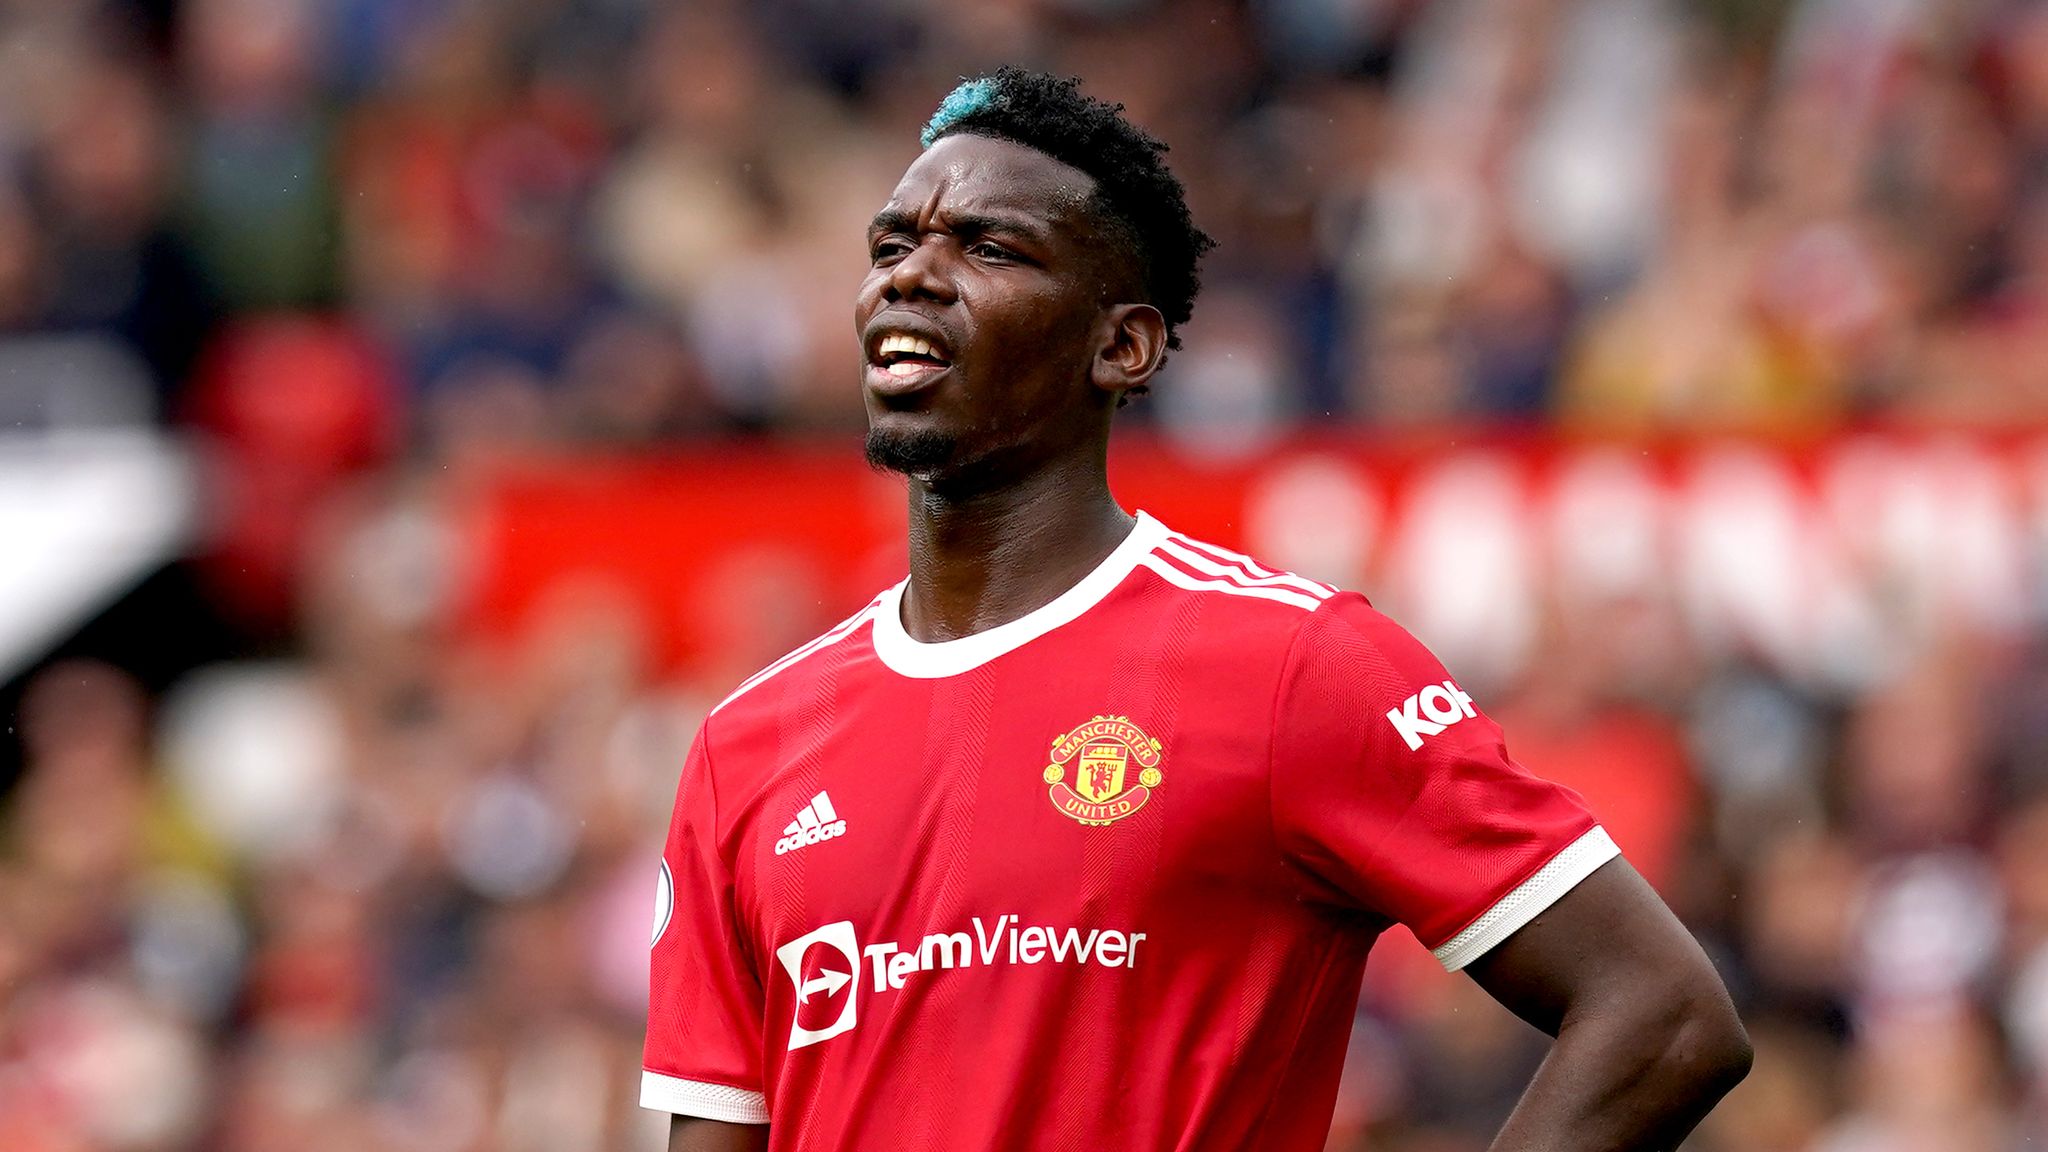 Paul Pogba posts emotional tweet mourning loss of Juventus youth player  Bryan Dodien | World News | Sky News